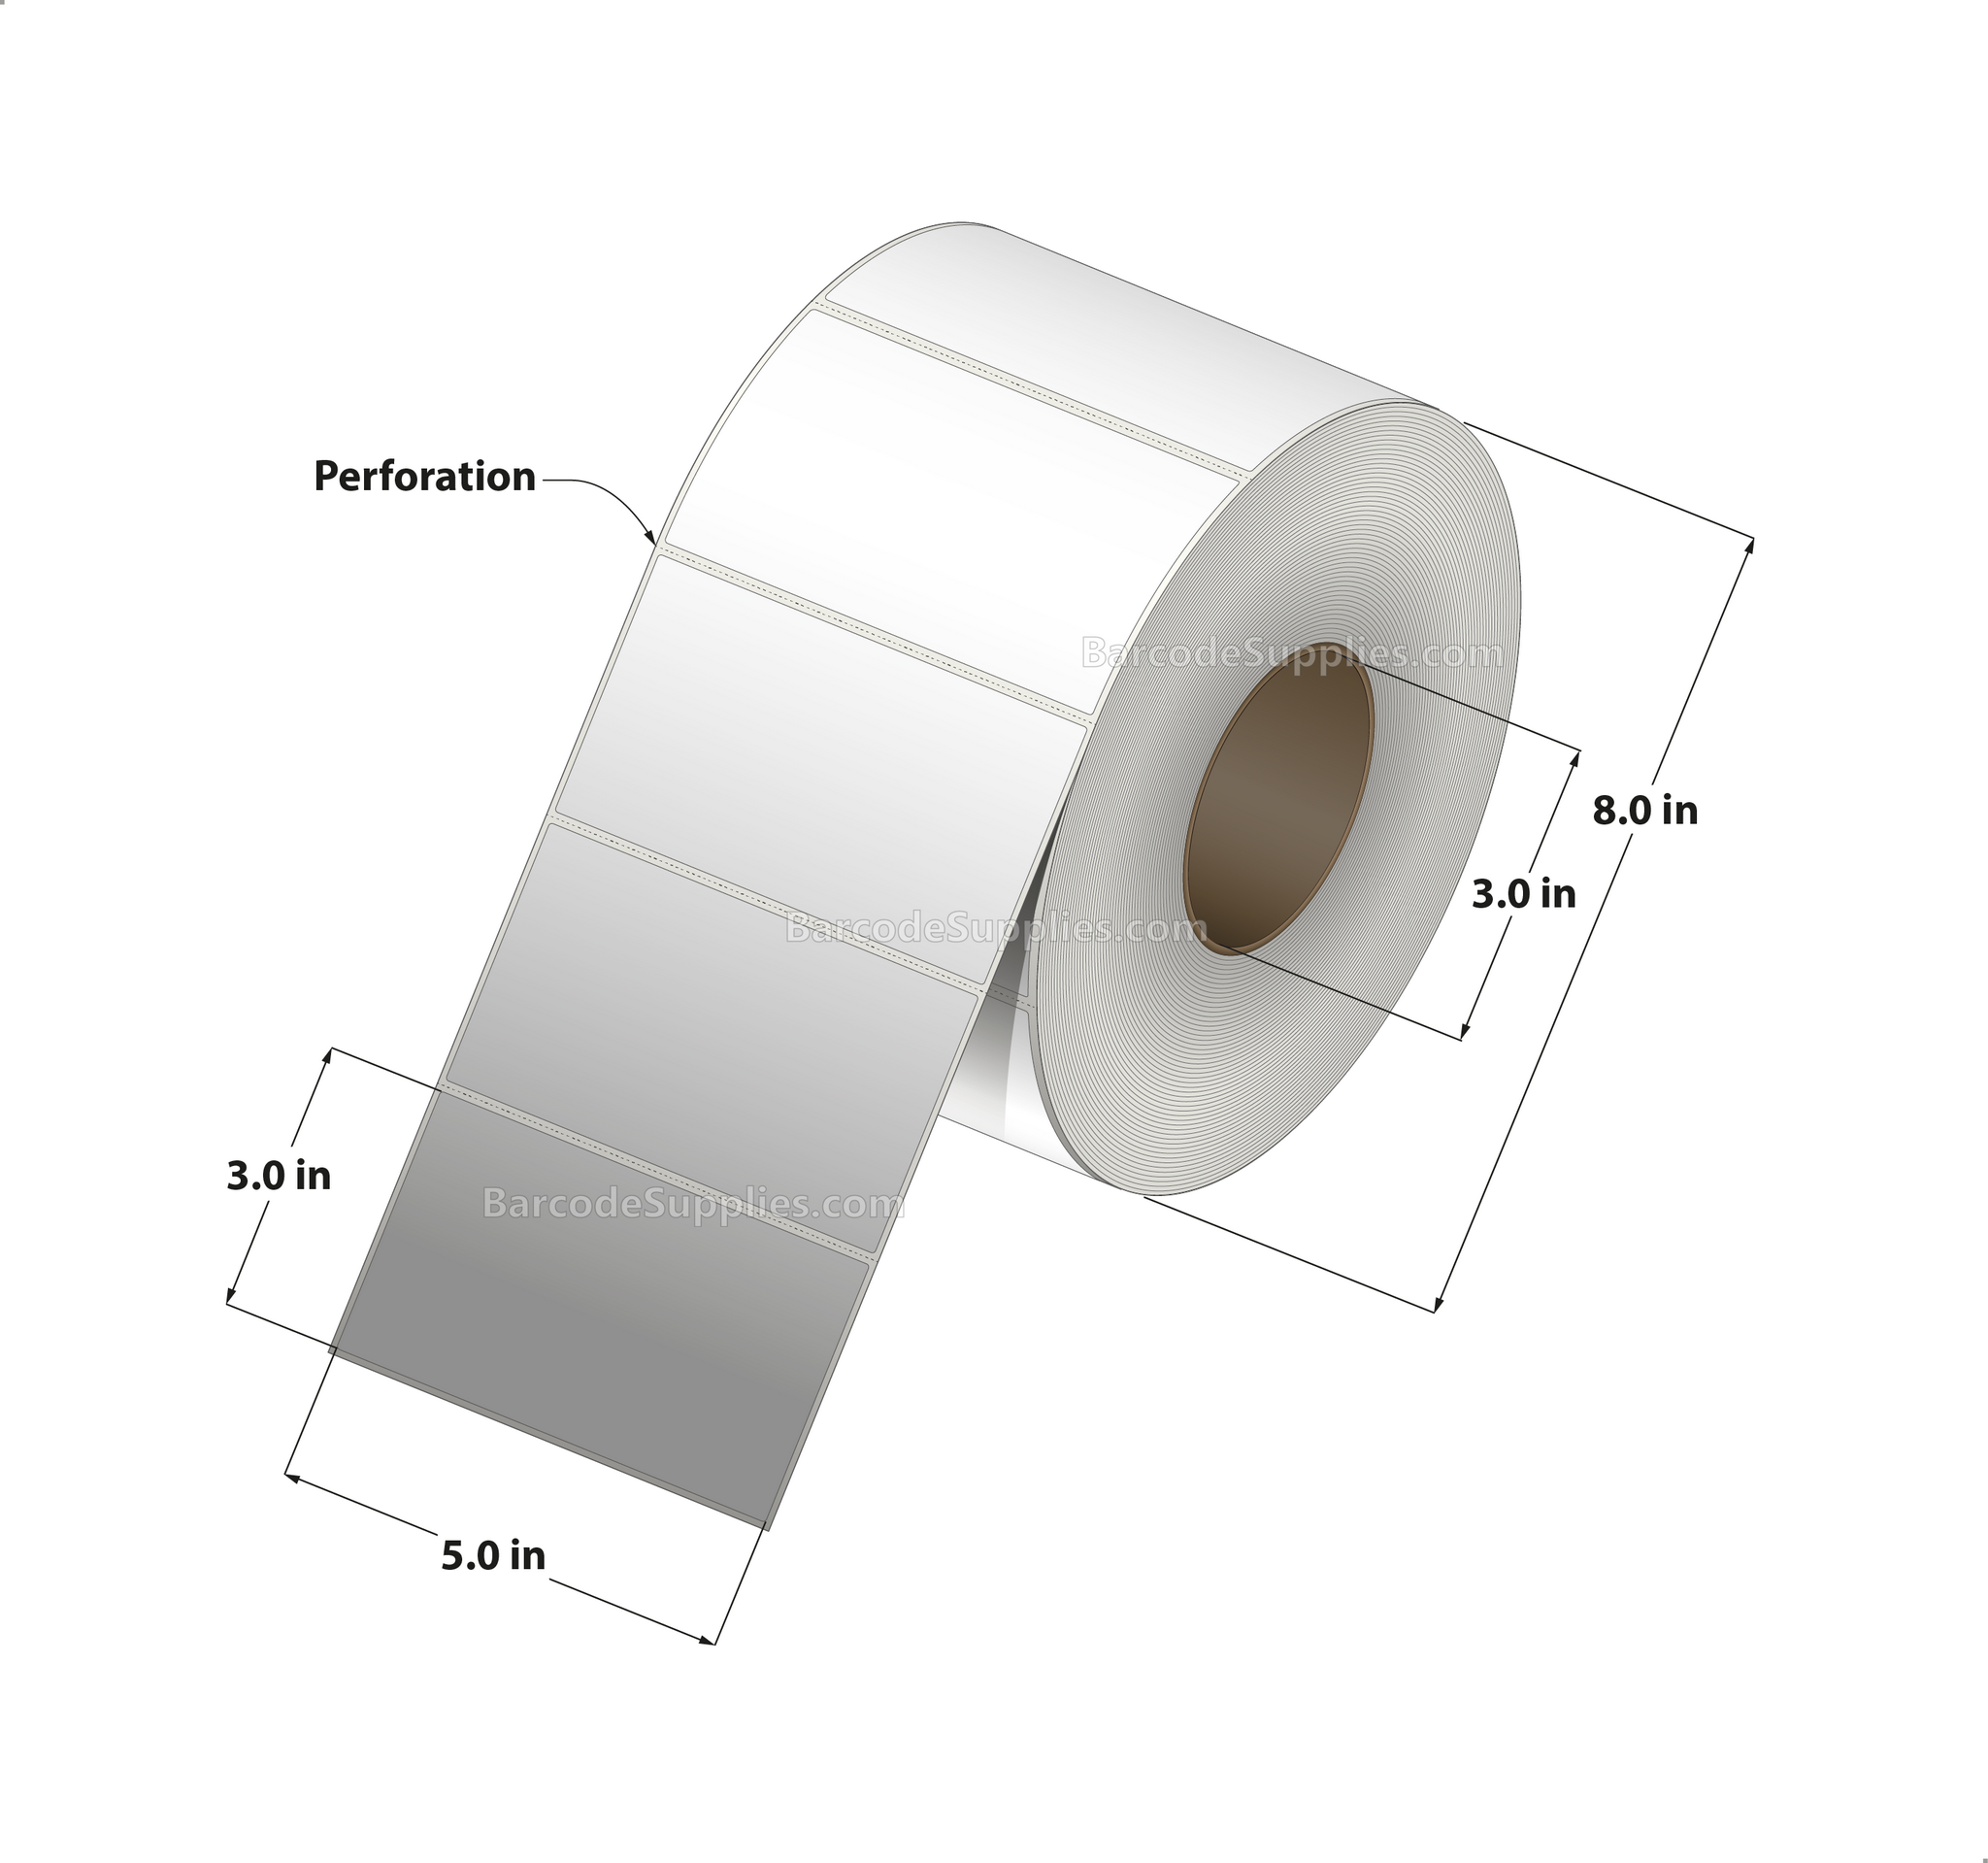 5 x 3 Thermal Transfer White Labels With Permanent Acrylic Adhesive - Perforated - 1900 Labels Per Roll - Carton Of 4 Rolls - 7600 Labels Total - MPN: TH53-1P